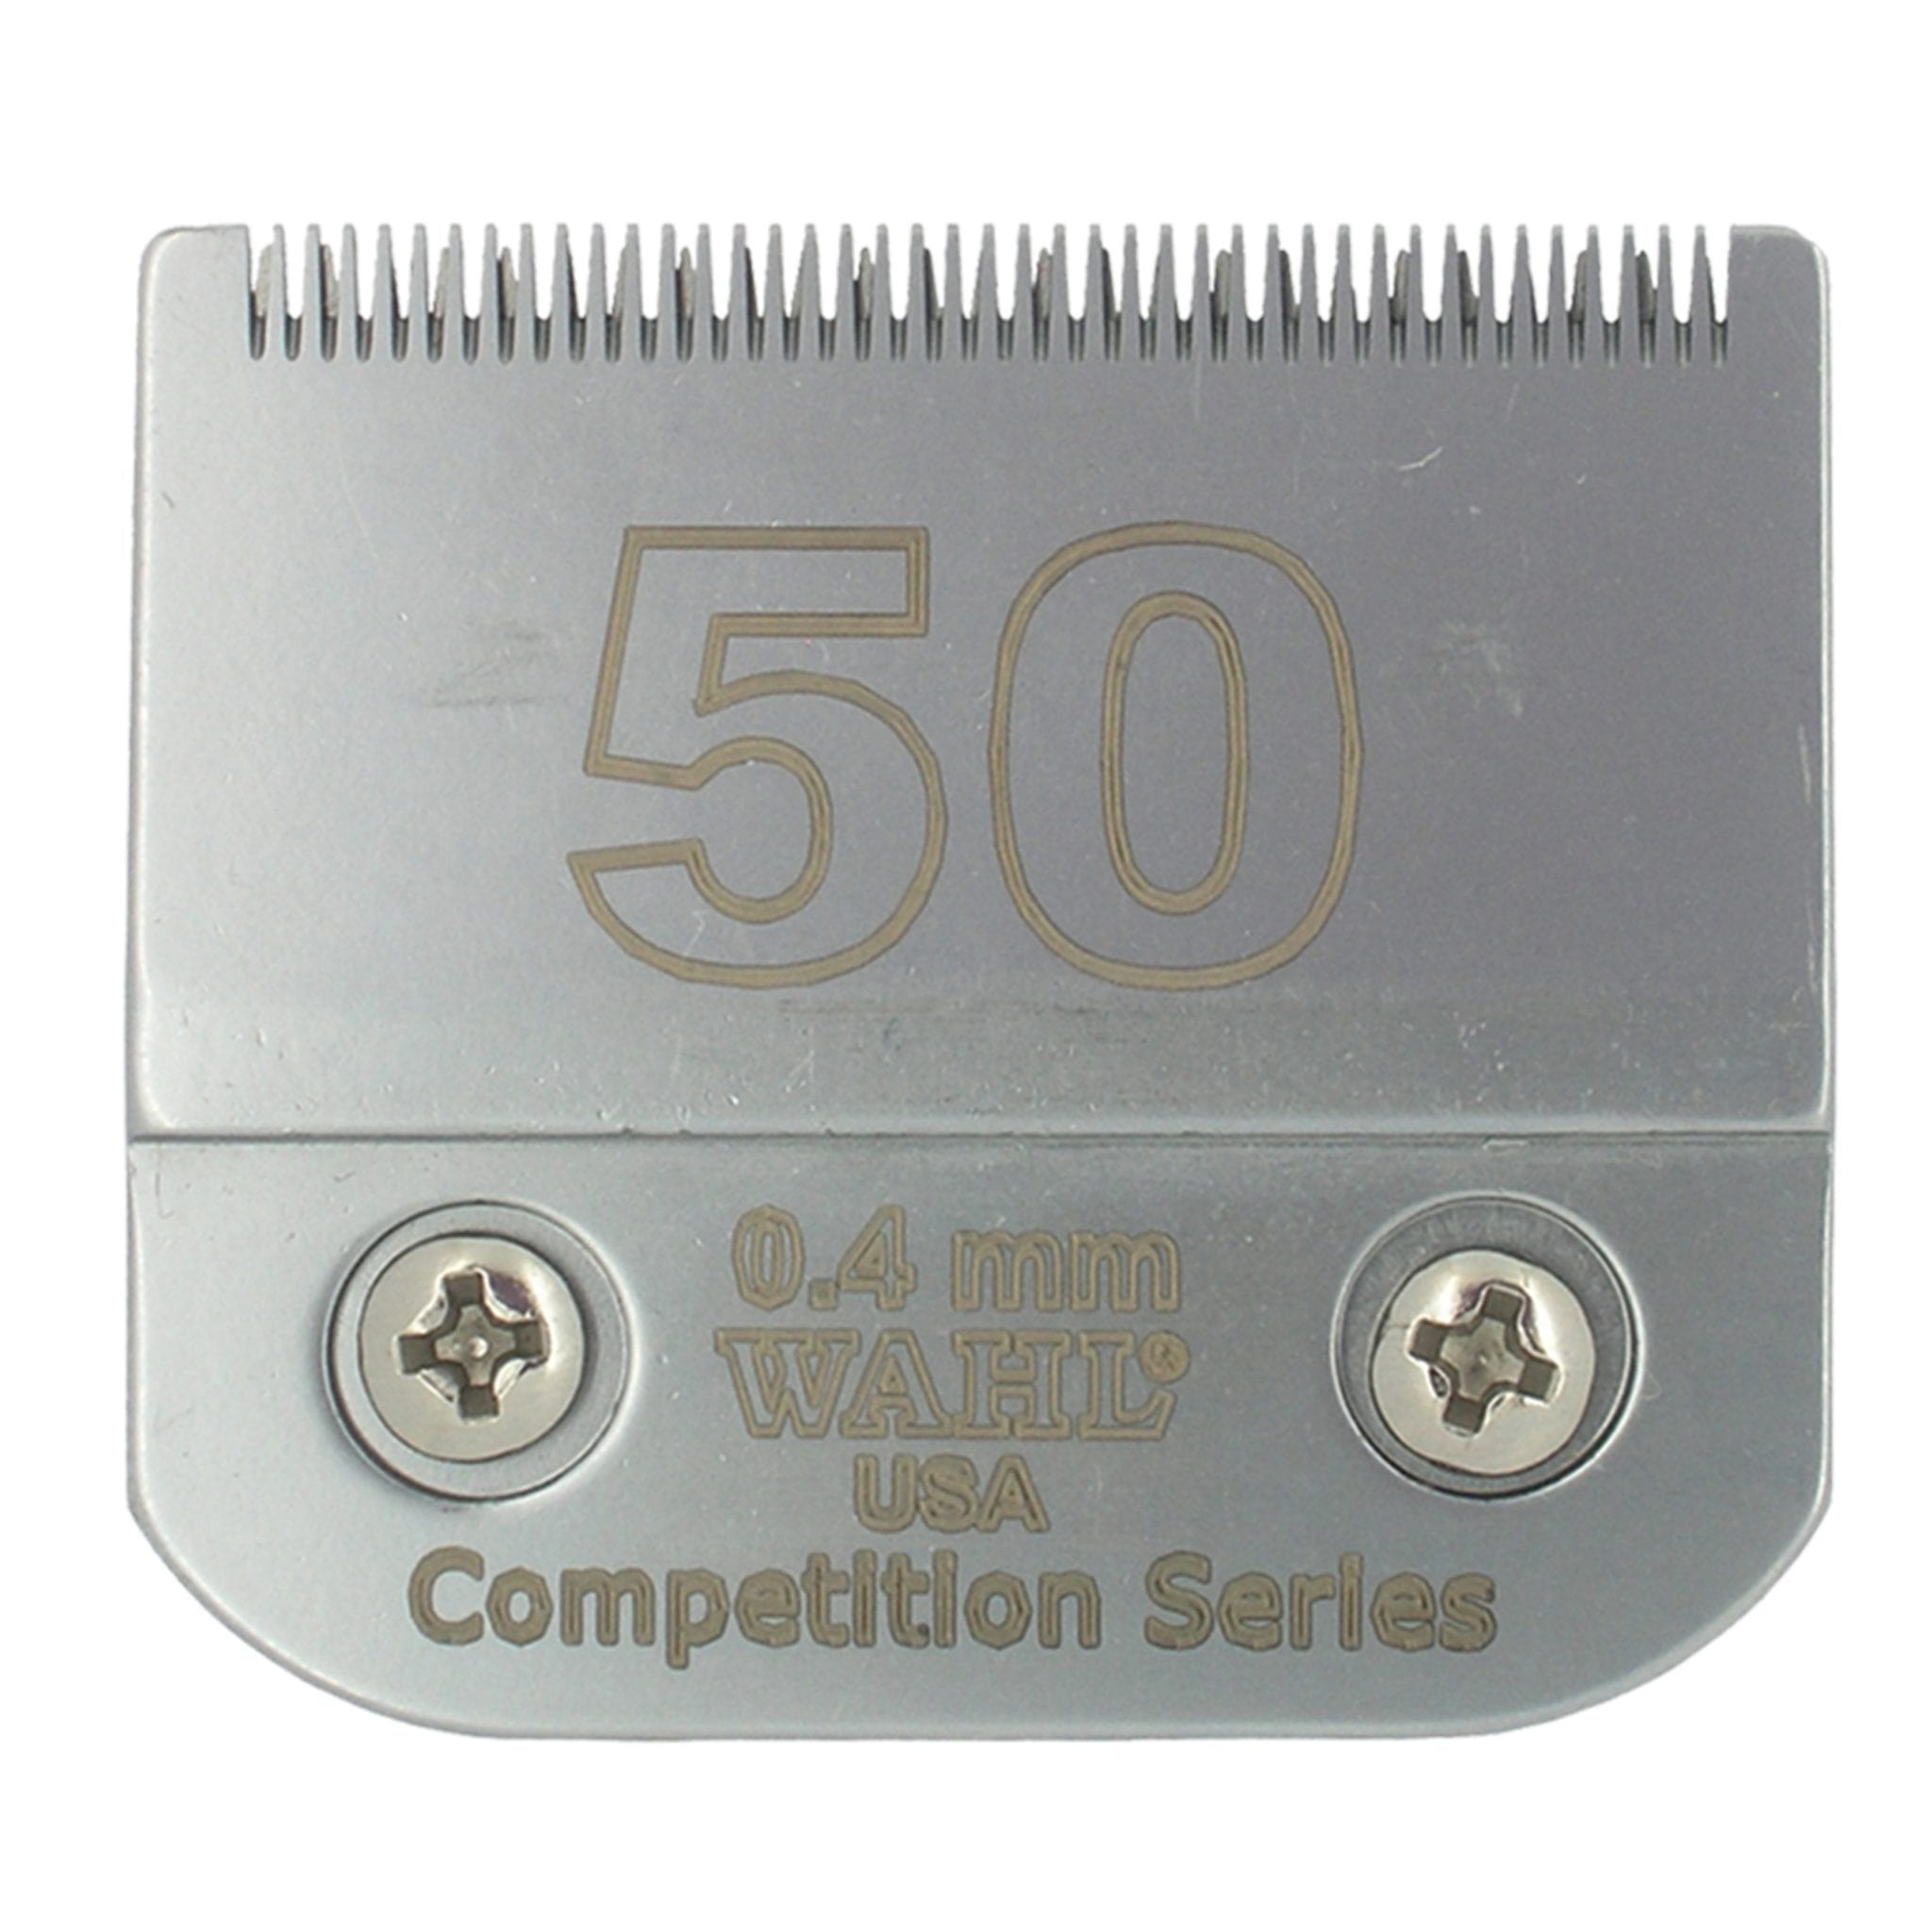 Lame Wahl Competition Series